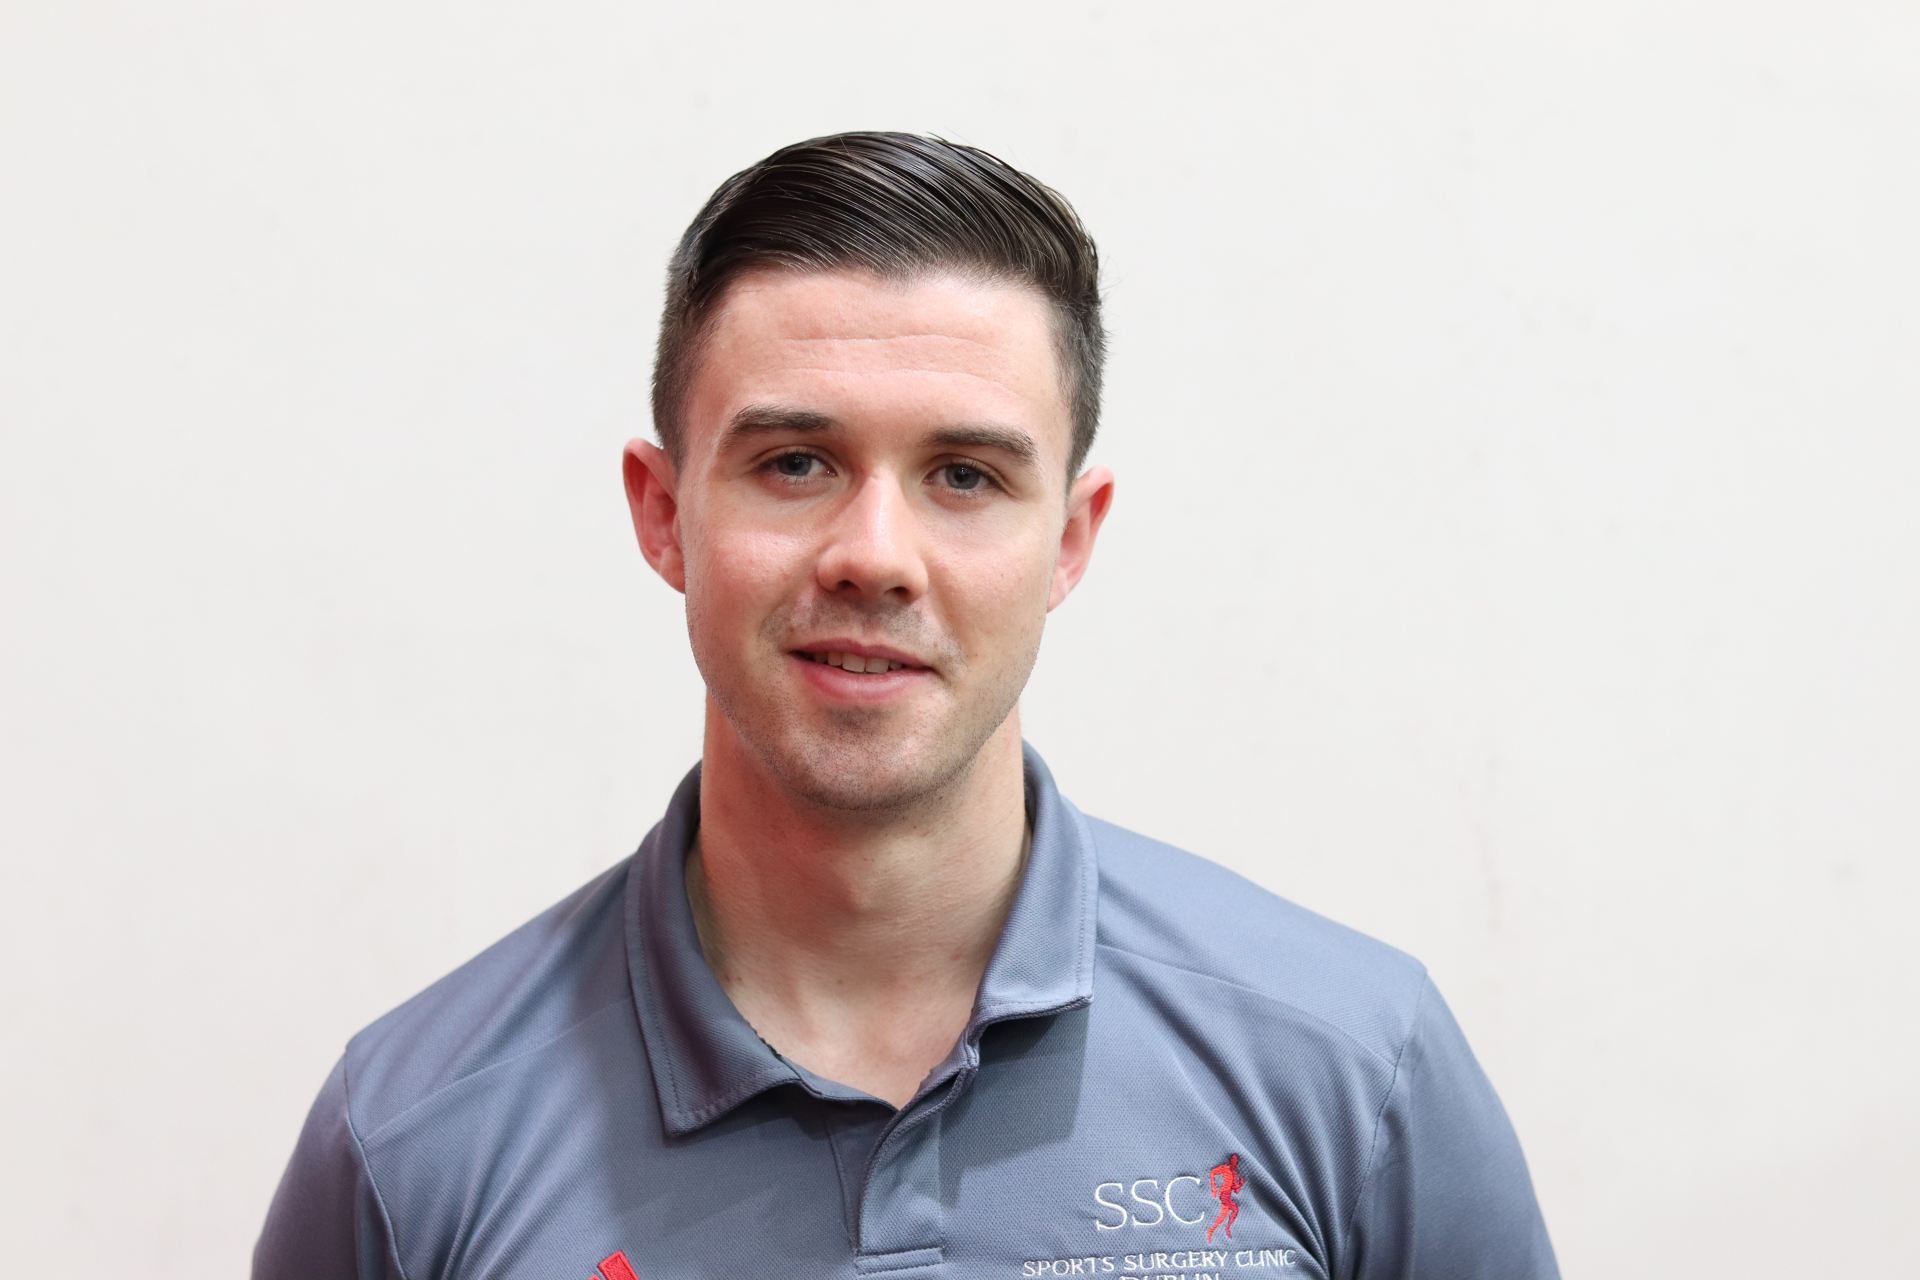 Michael works as a Strength & Conditioning Coach at SSC Sports Medicine